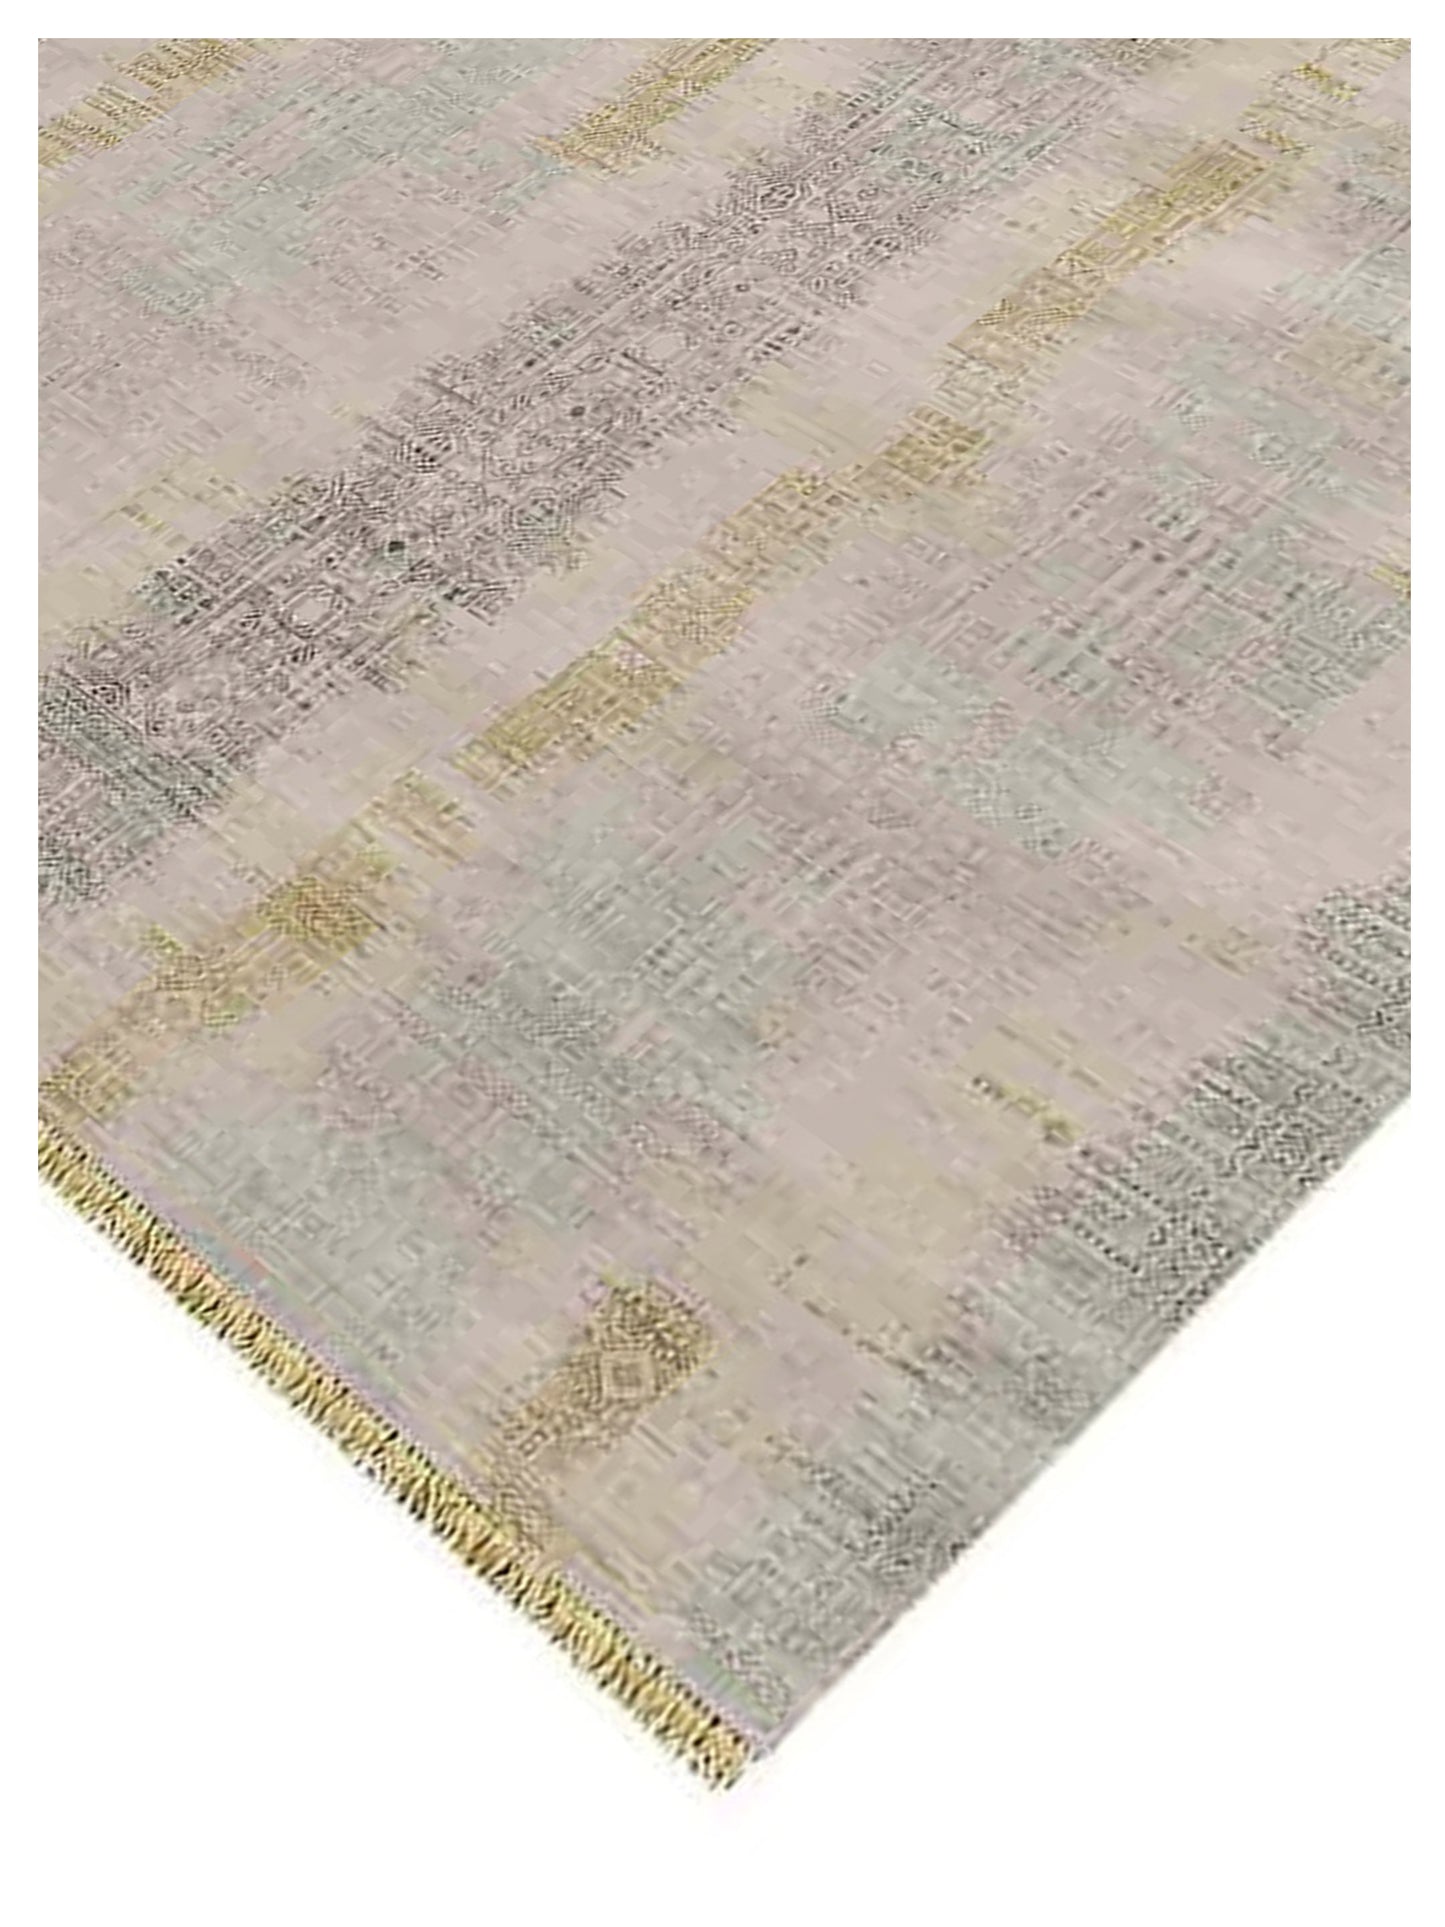 Limited PARKES PA-566 Mushroom  Transitional Knotted Rug